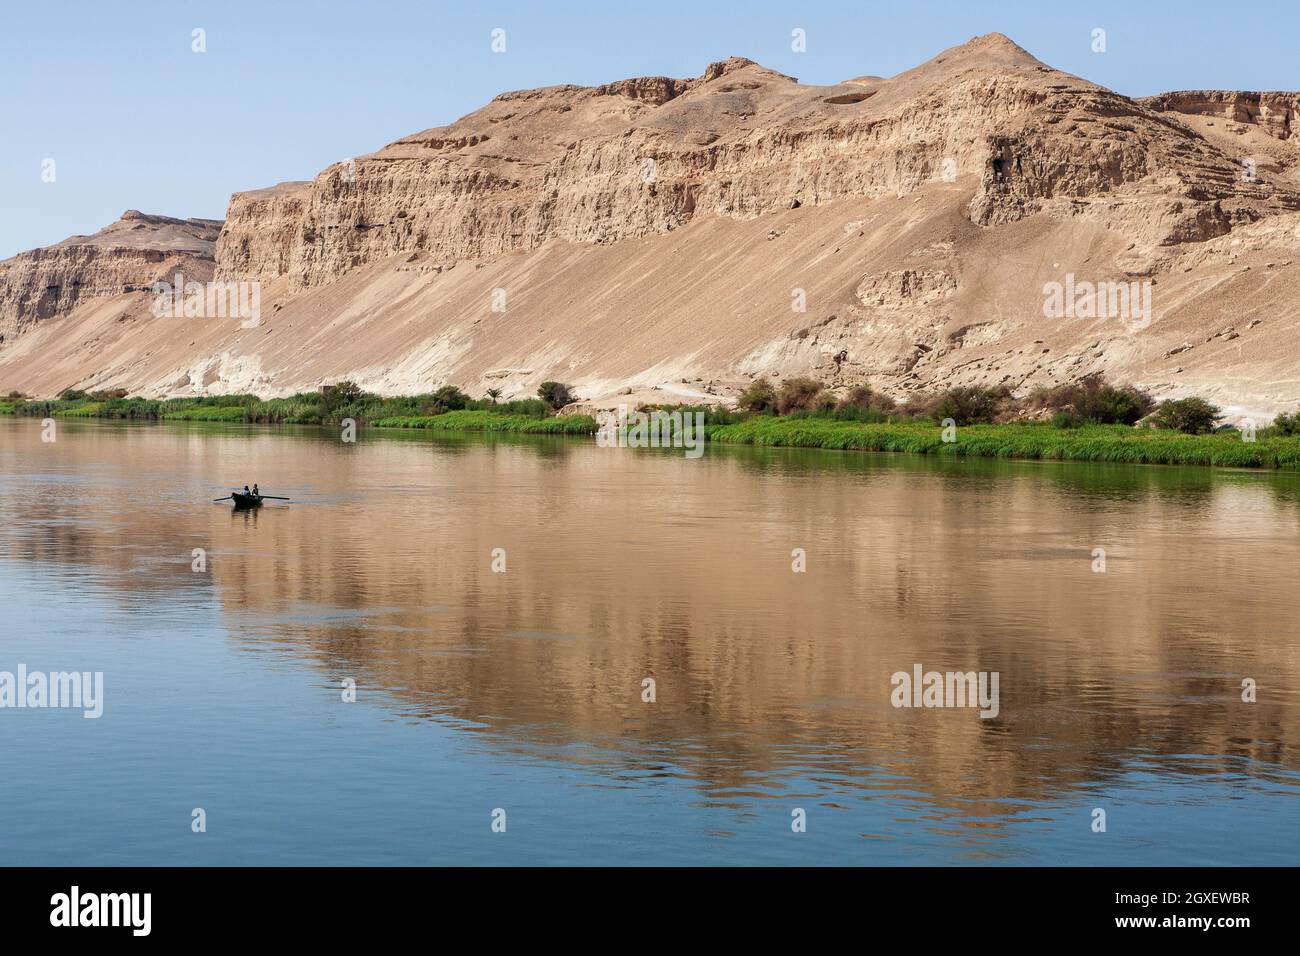 Two fishermen in a small boat on the Nile very small in the vast reflection of the desert mountains behind Stock Photo